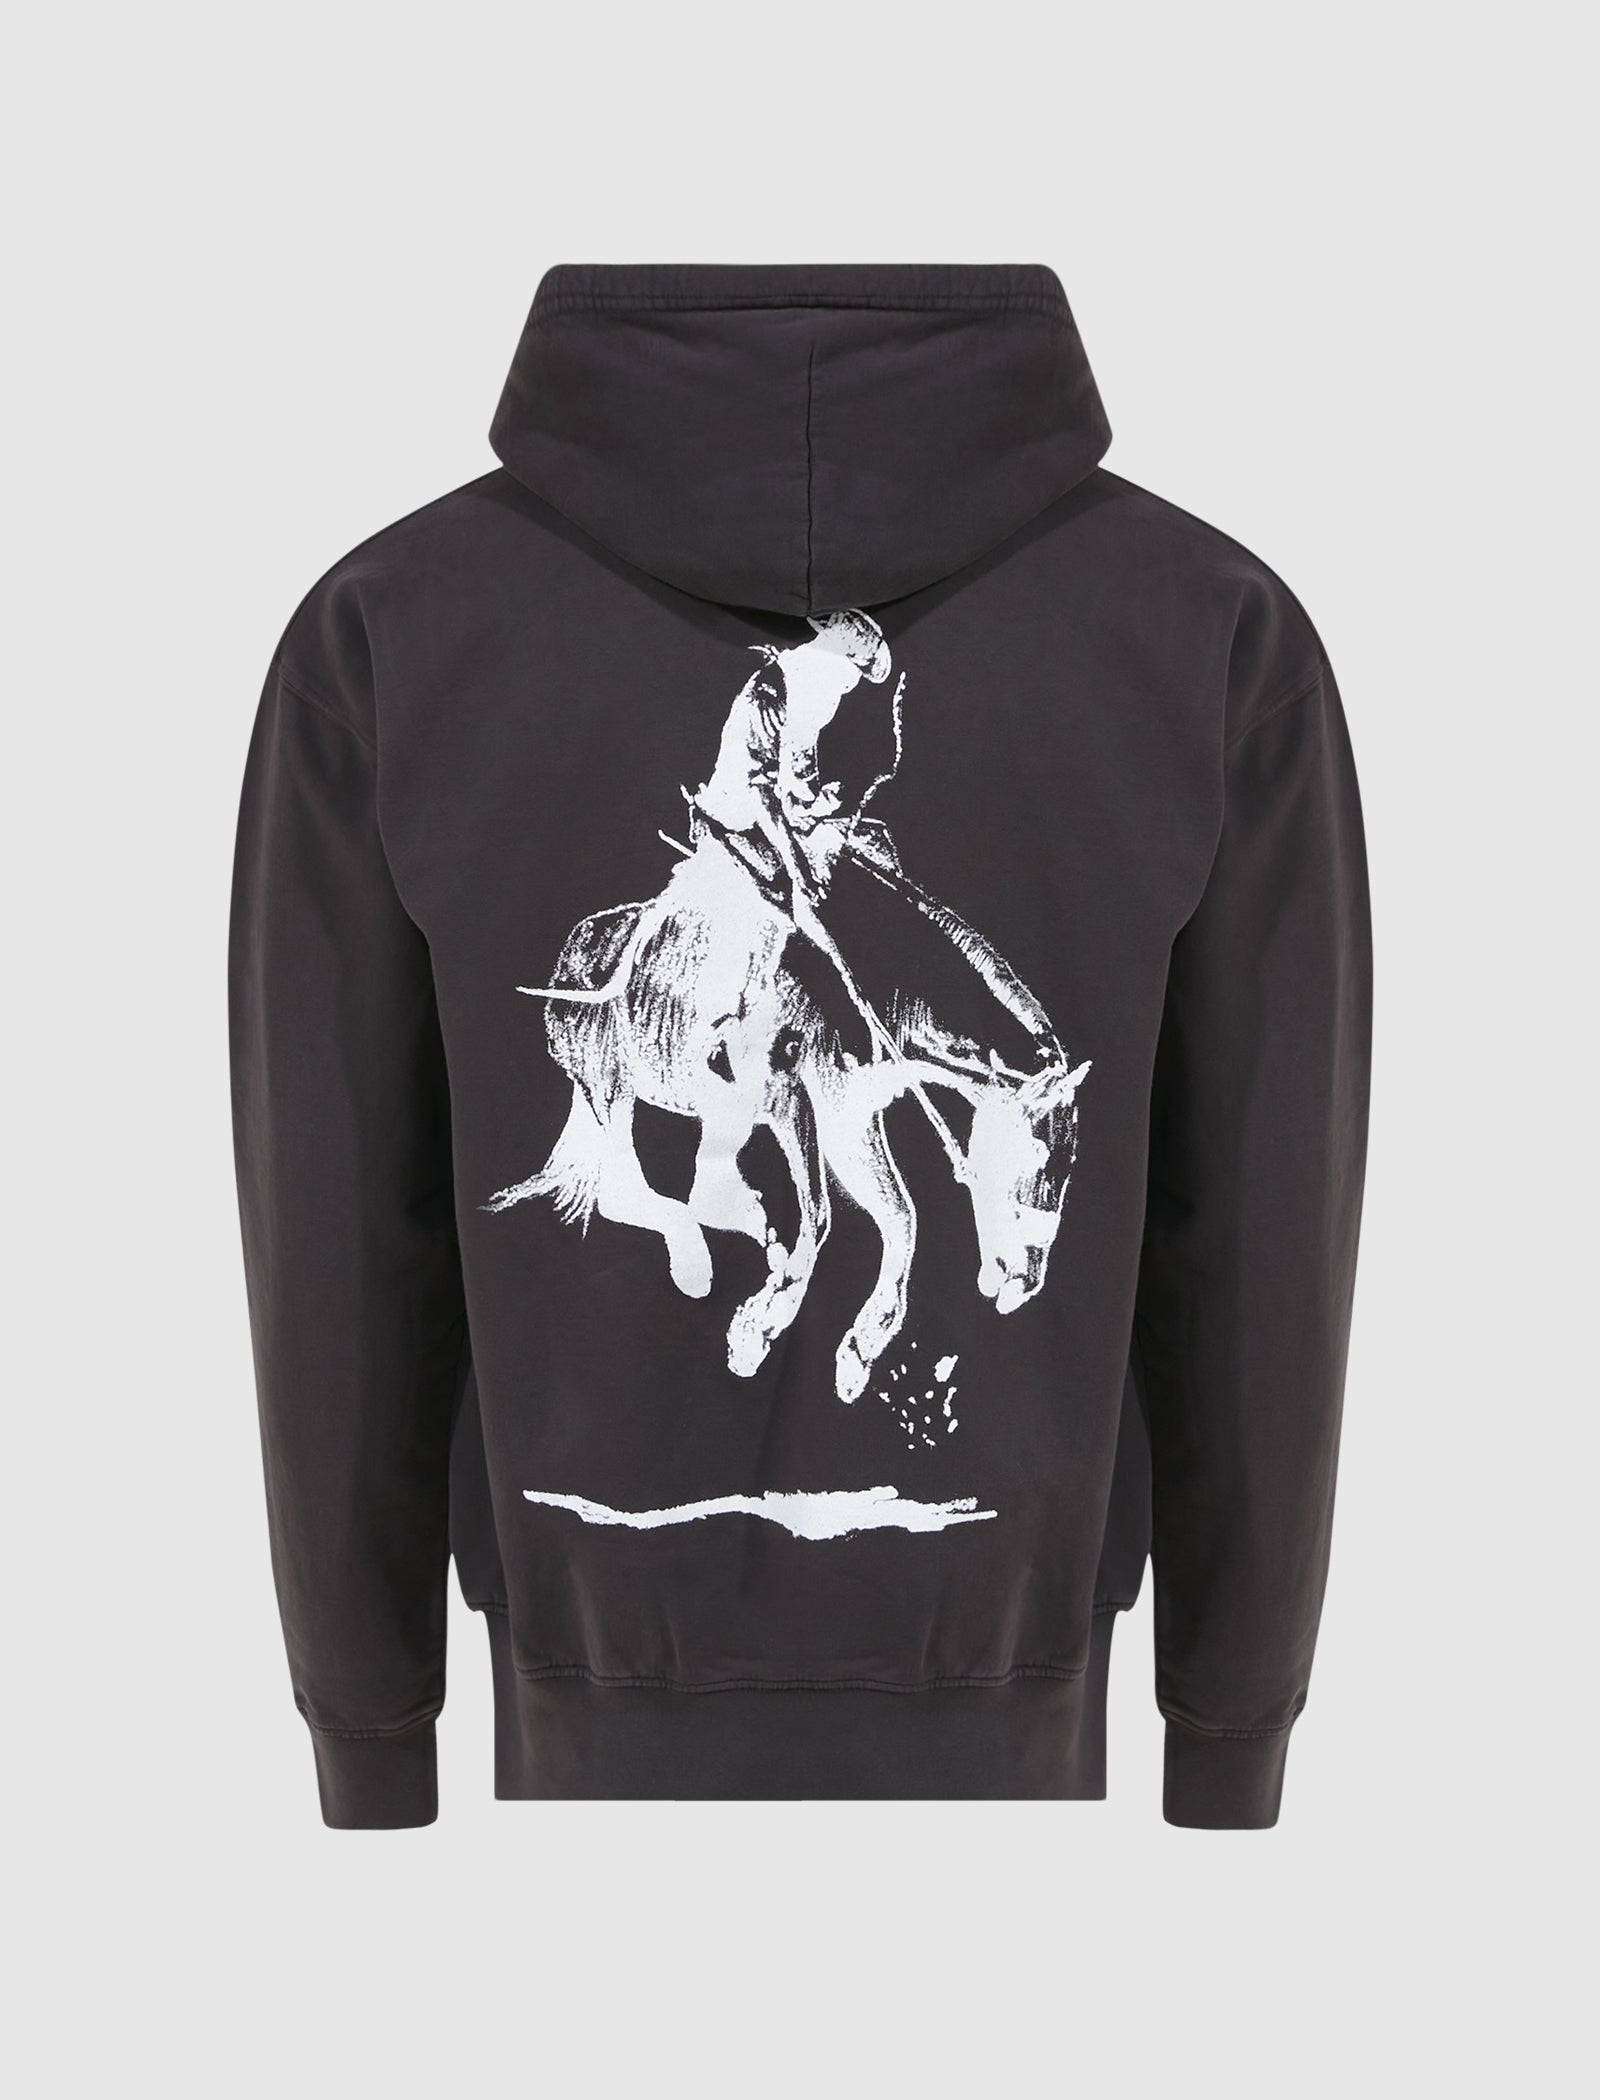 ONE OF THESE DAYS LAST DANCE HOODIE